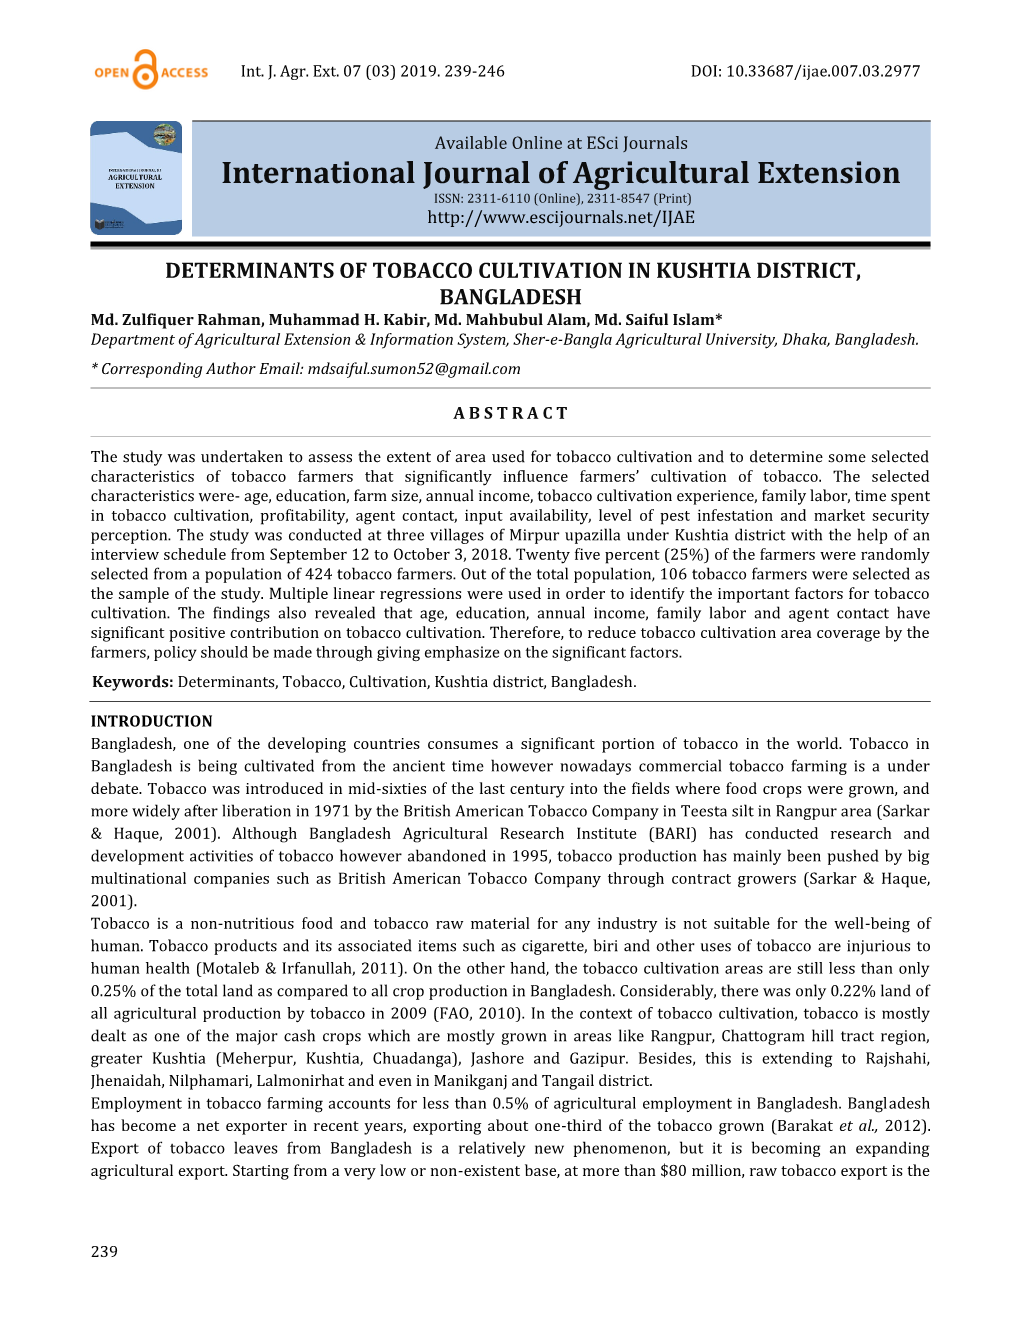 International Journal of Agricultural Extension ISSN: 2311-6110 (Online), 2311-8547 (Print)